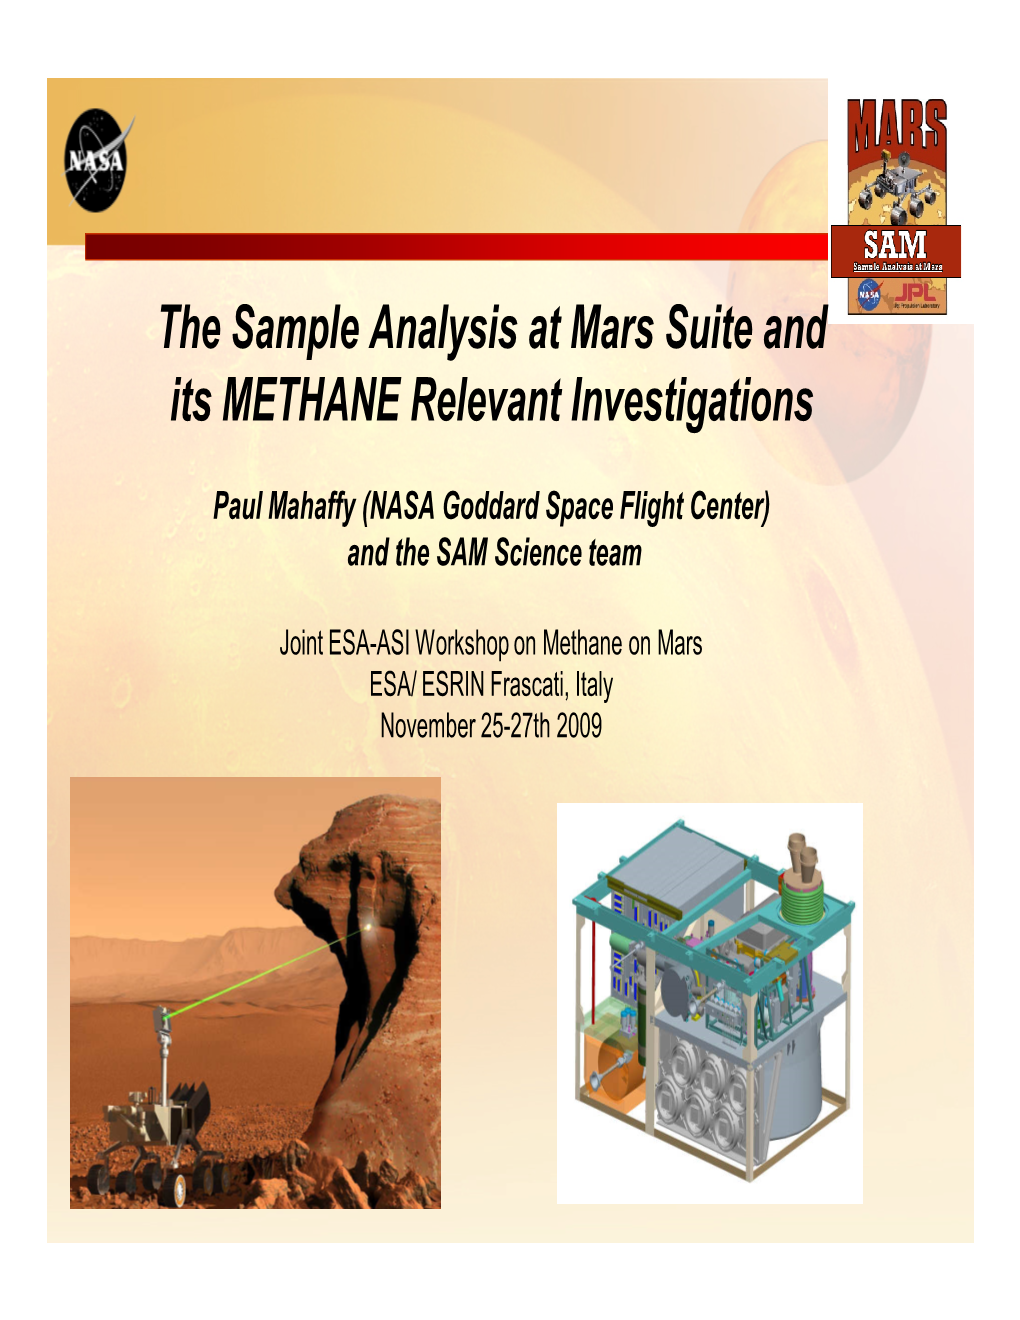 The Sample Analysis at Mars Suite and Its METHANE Relevant Investigations